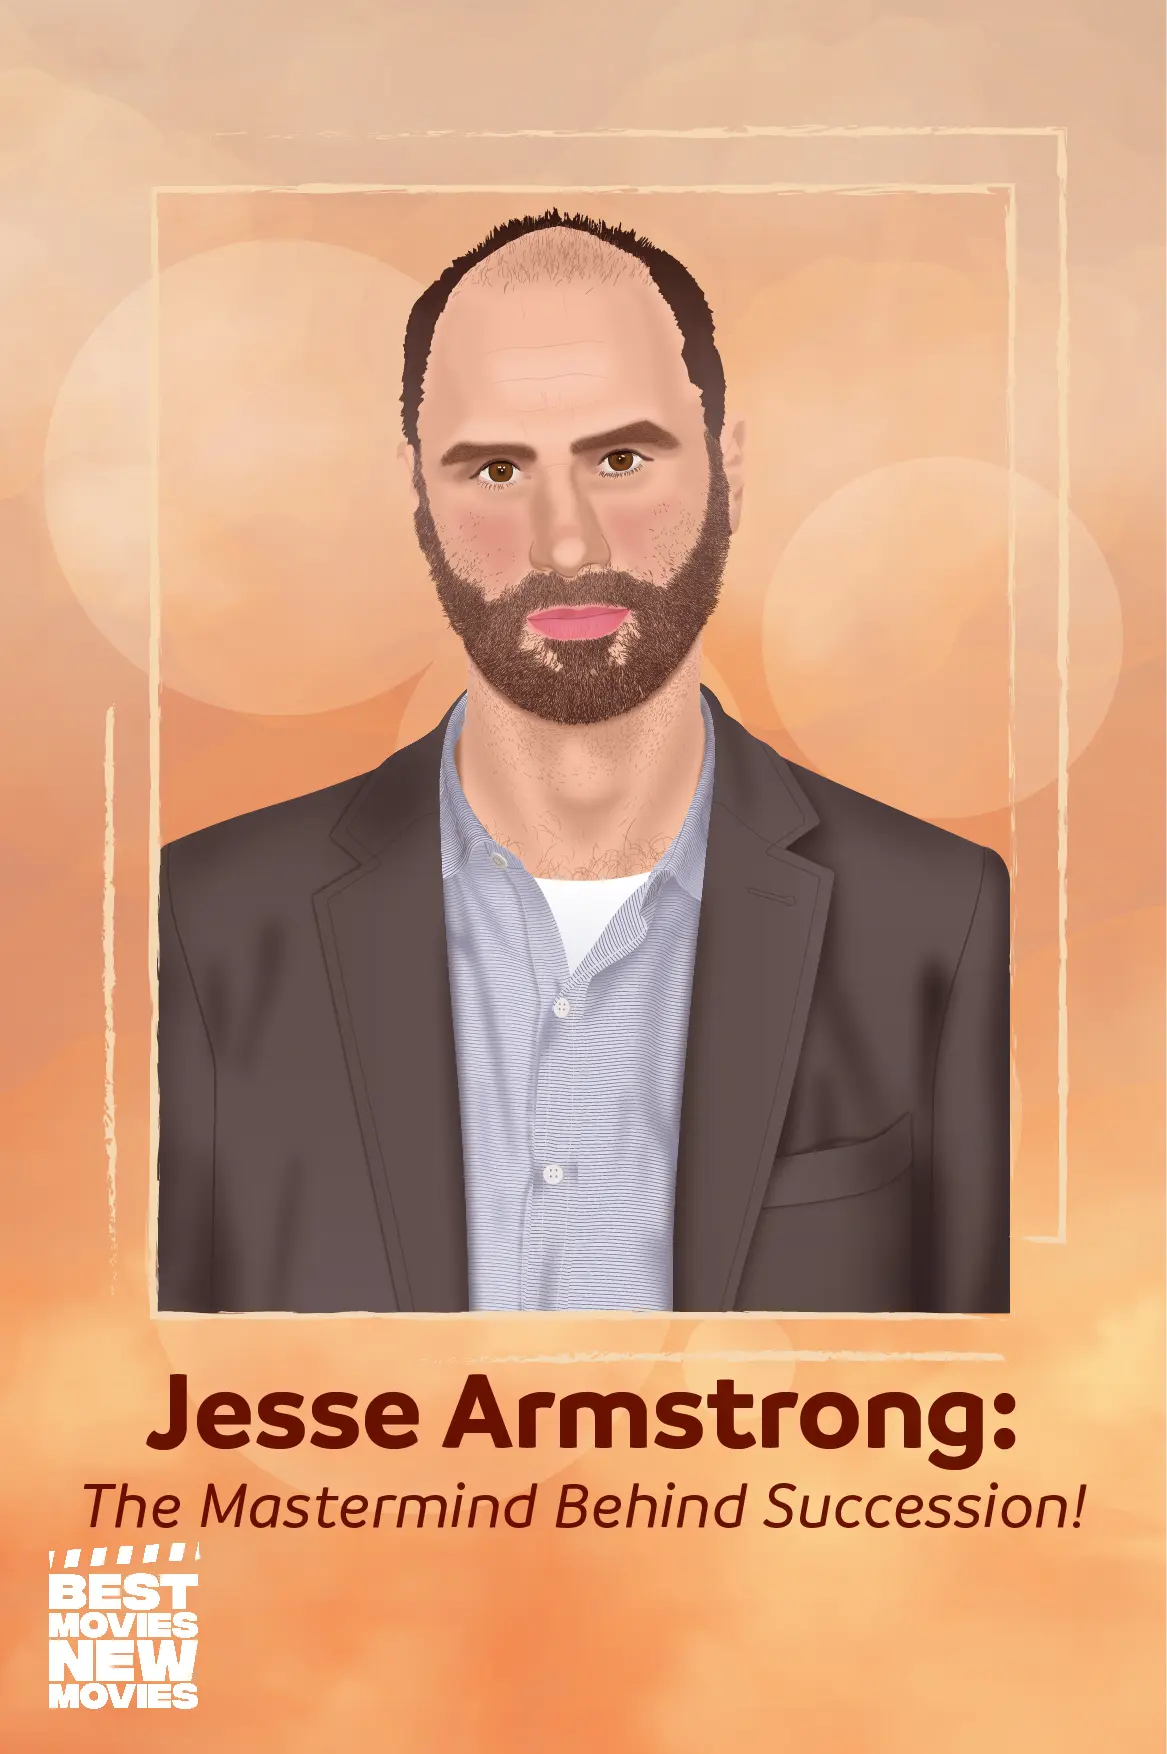 Jesse Armstrong